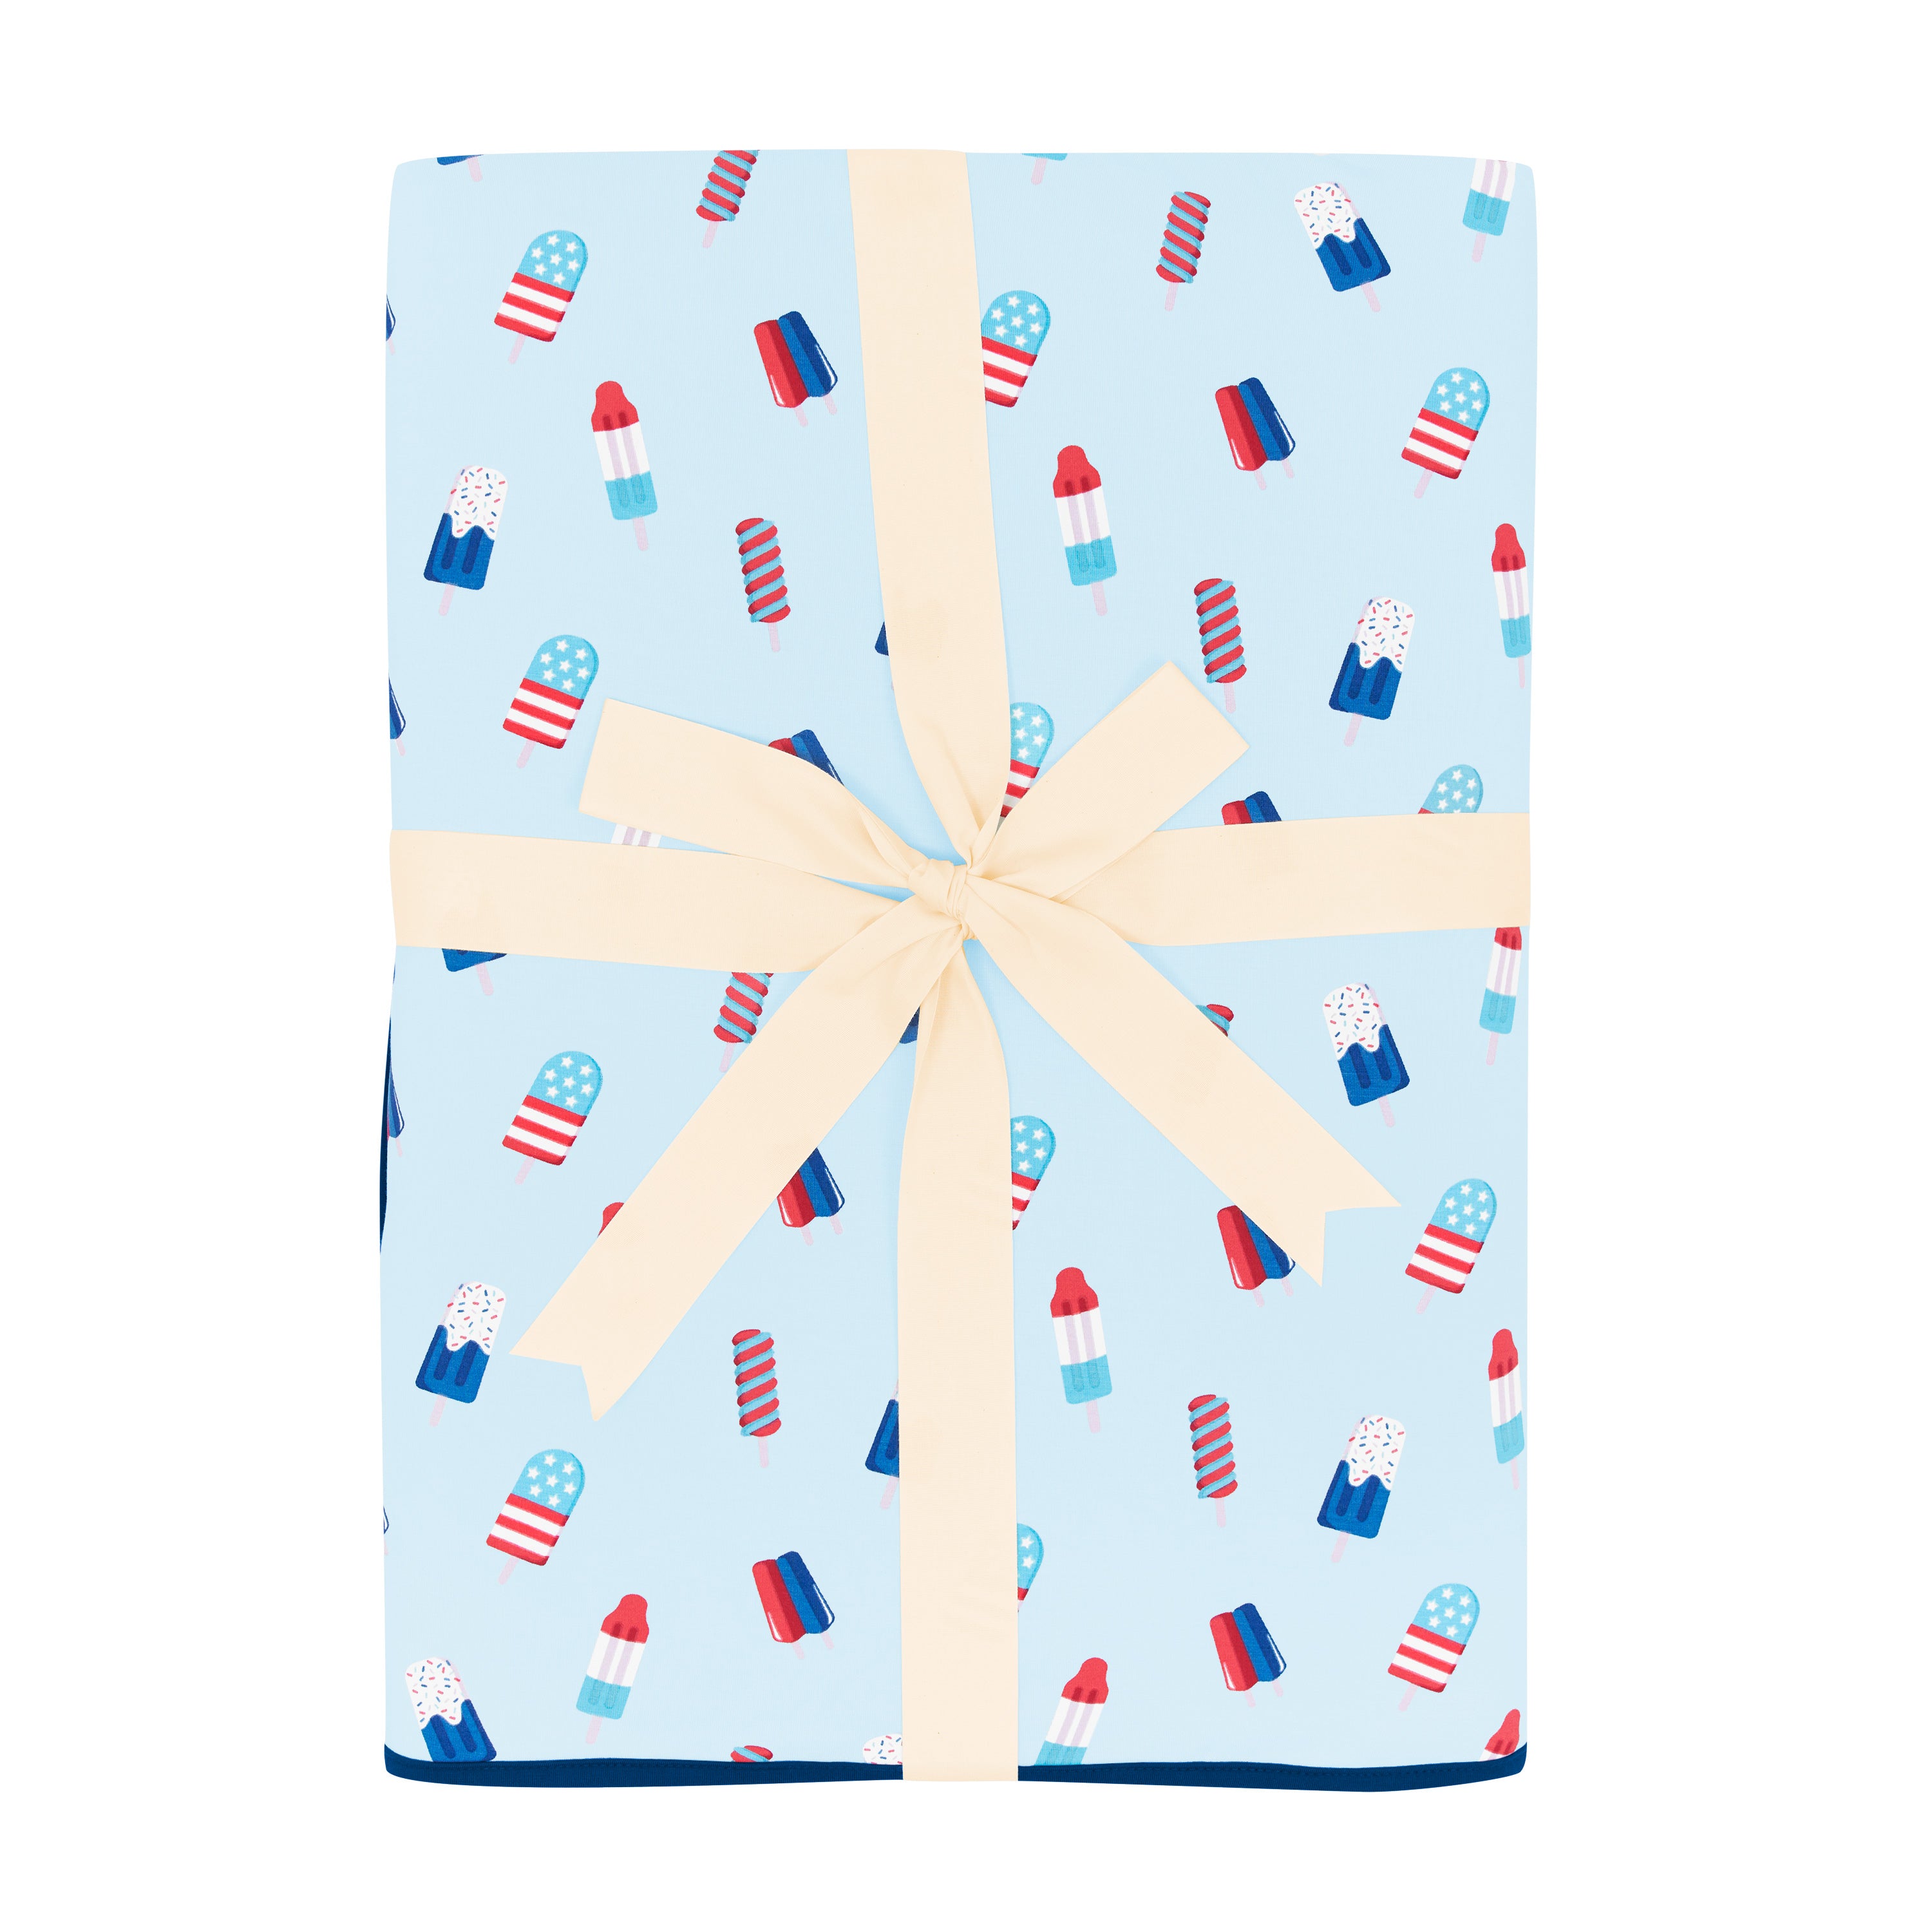 Youth Blanket in Popsicle 1.0